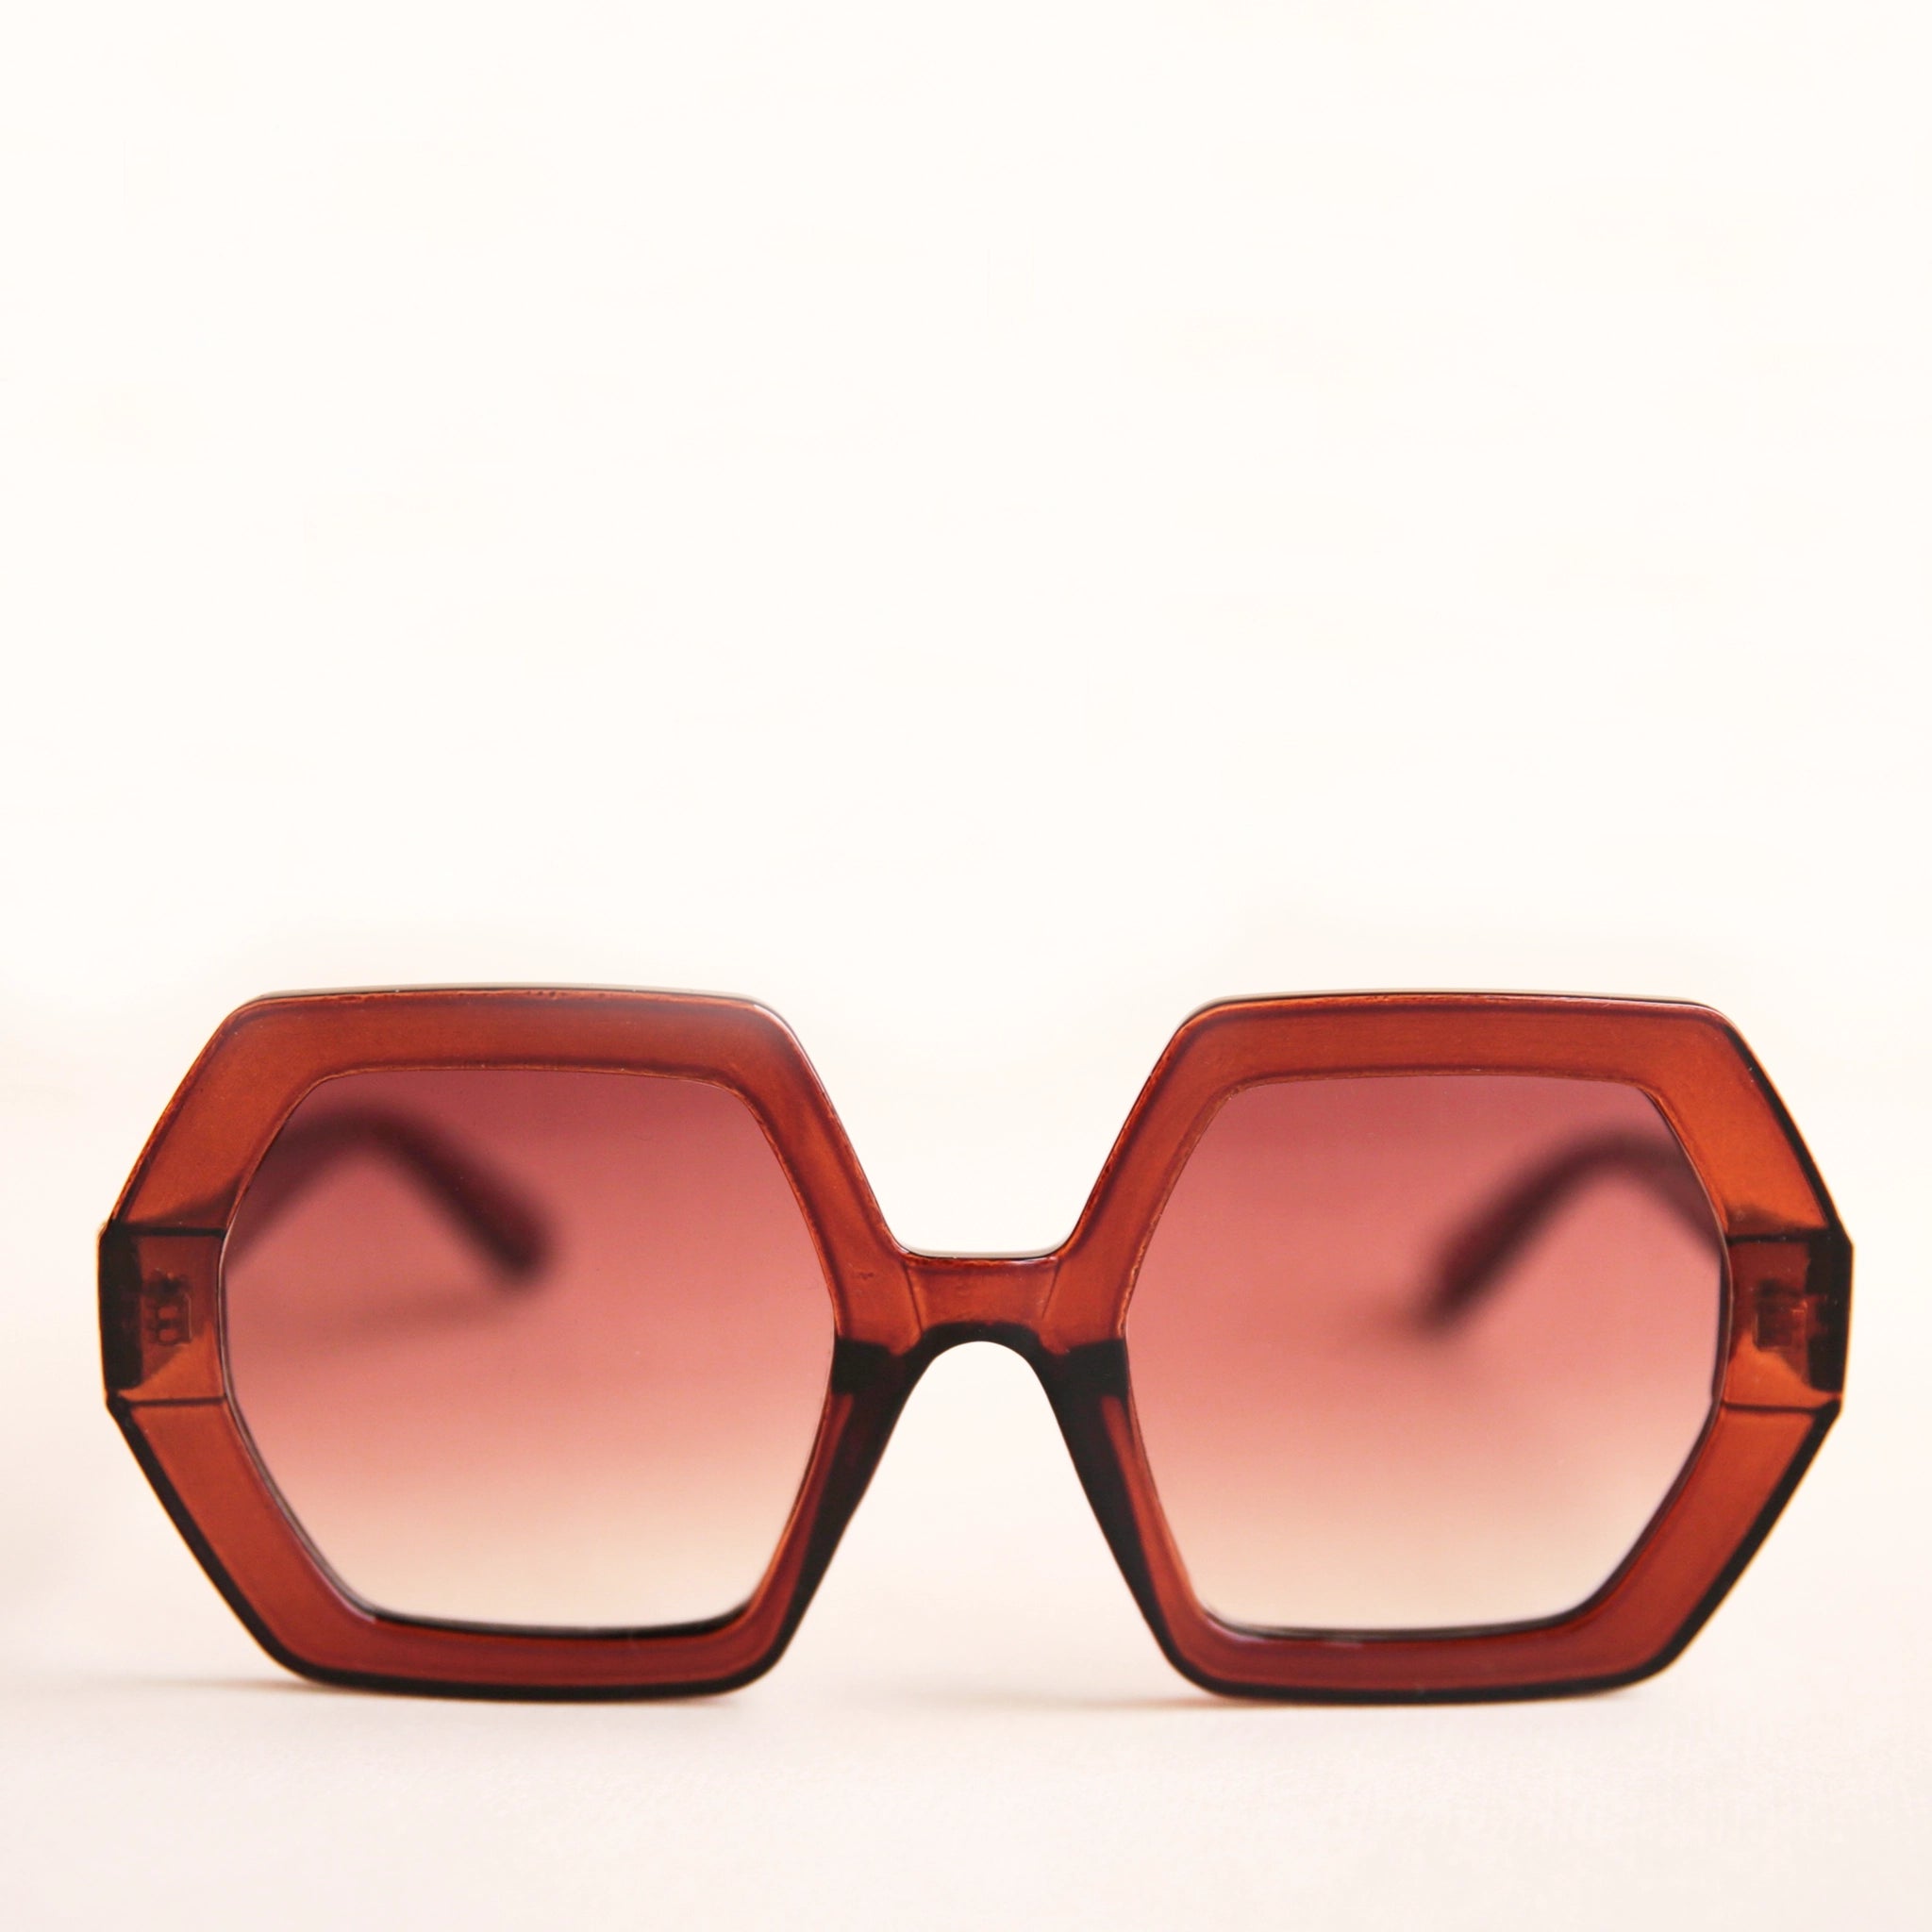 On a neutral background is a pair of hexagon shaped sunglasses in a cognac brown color.